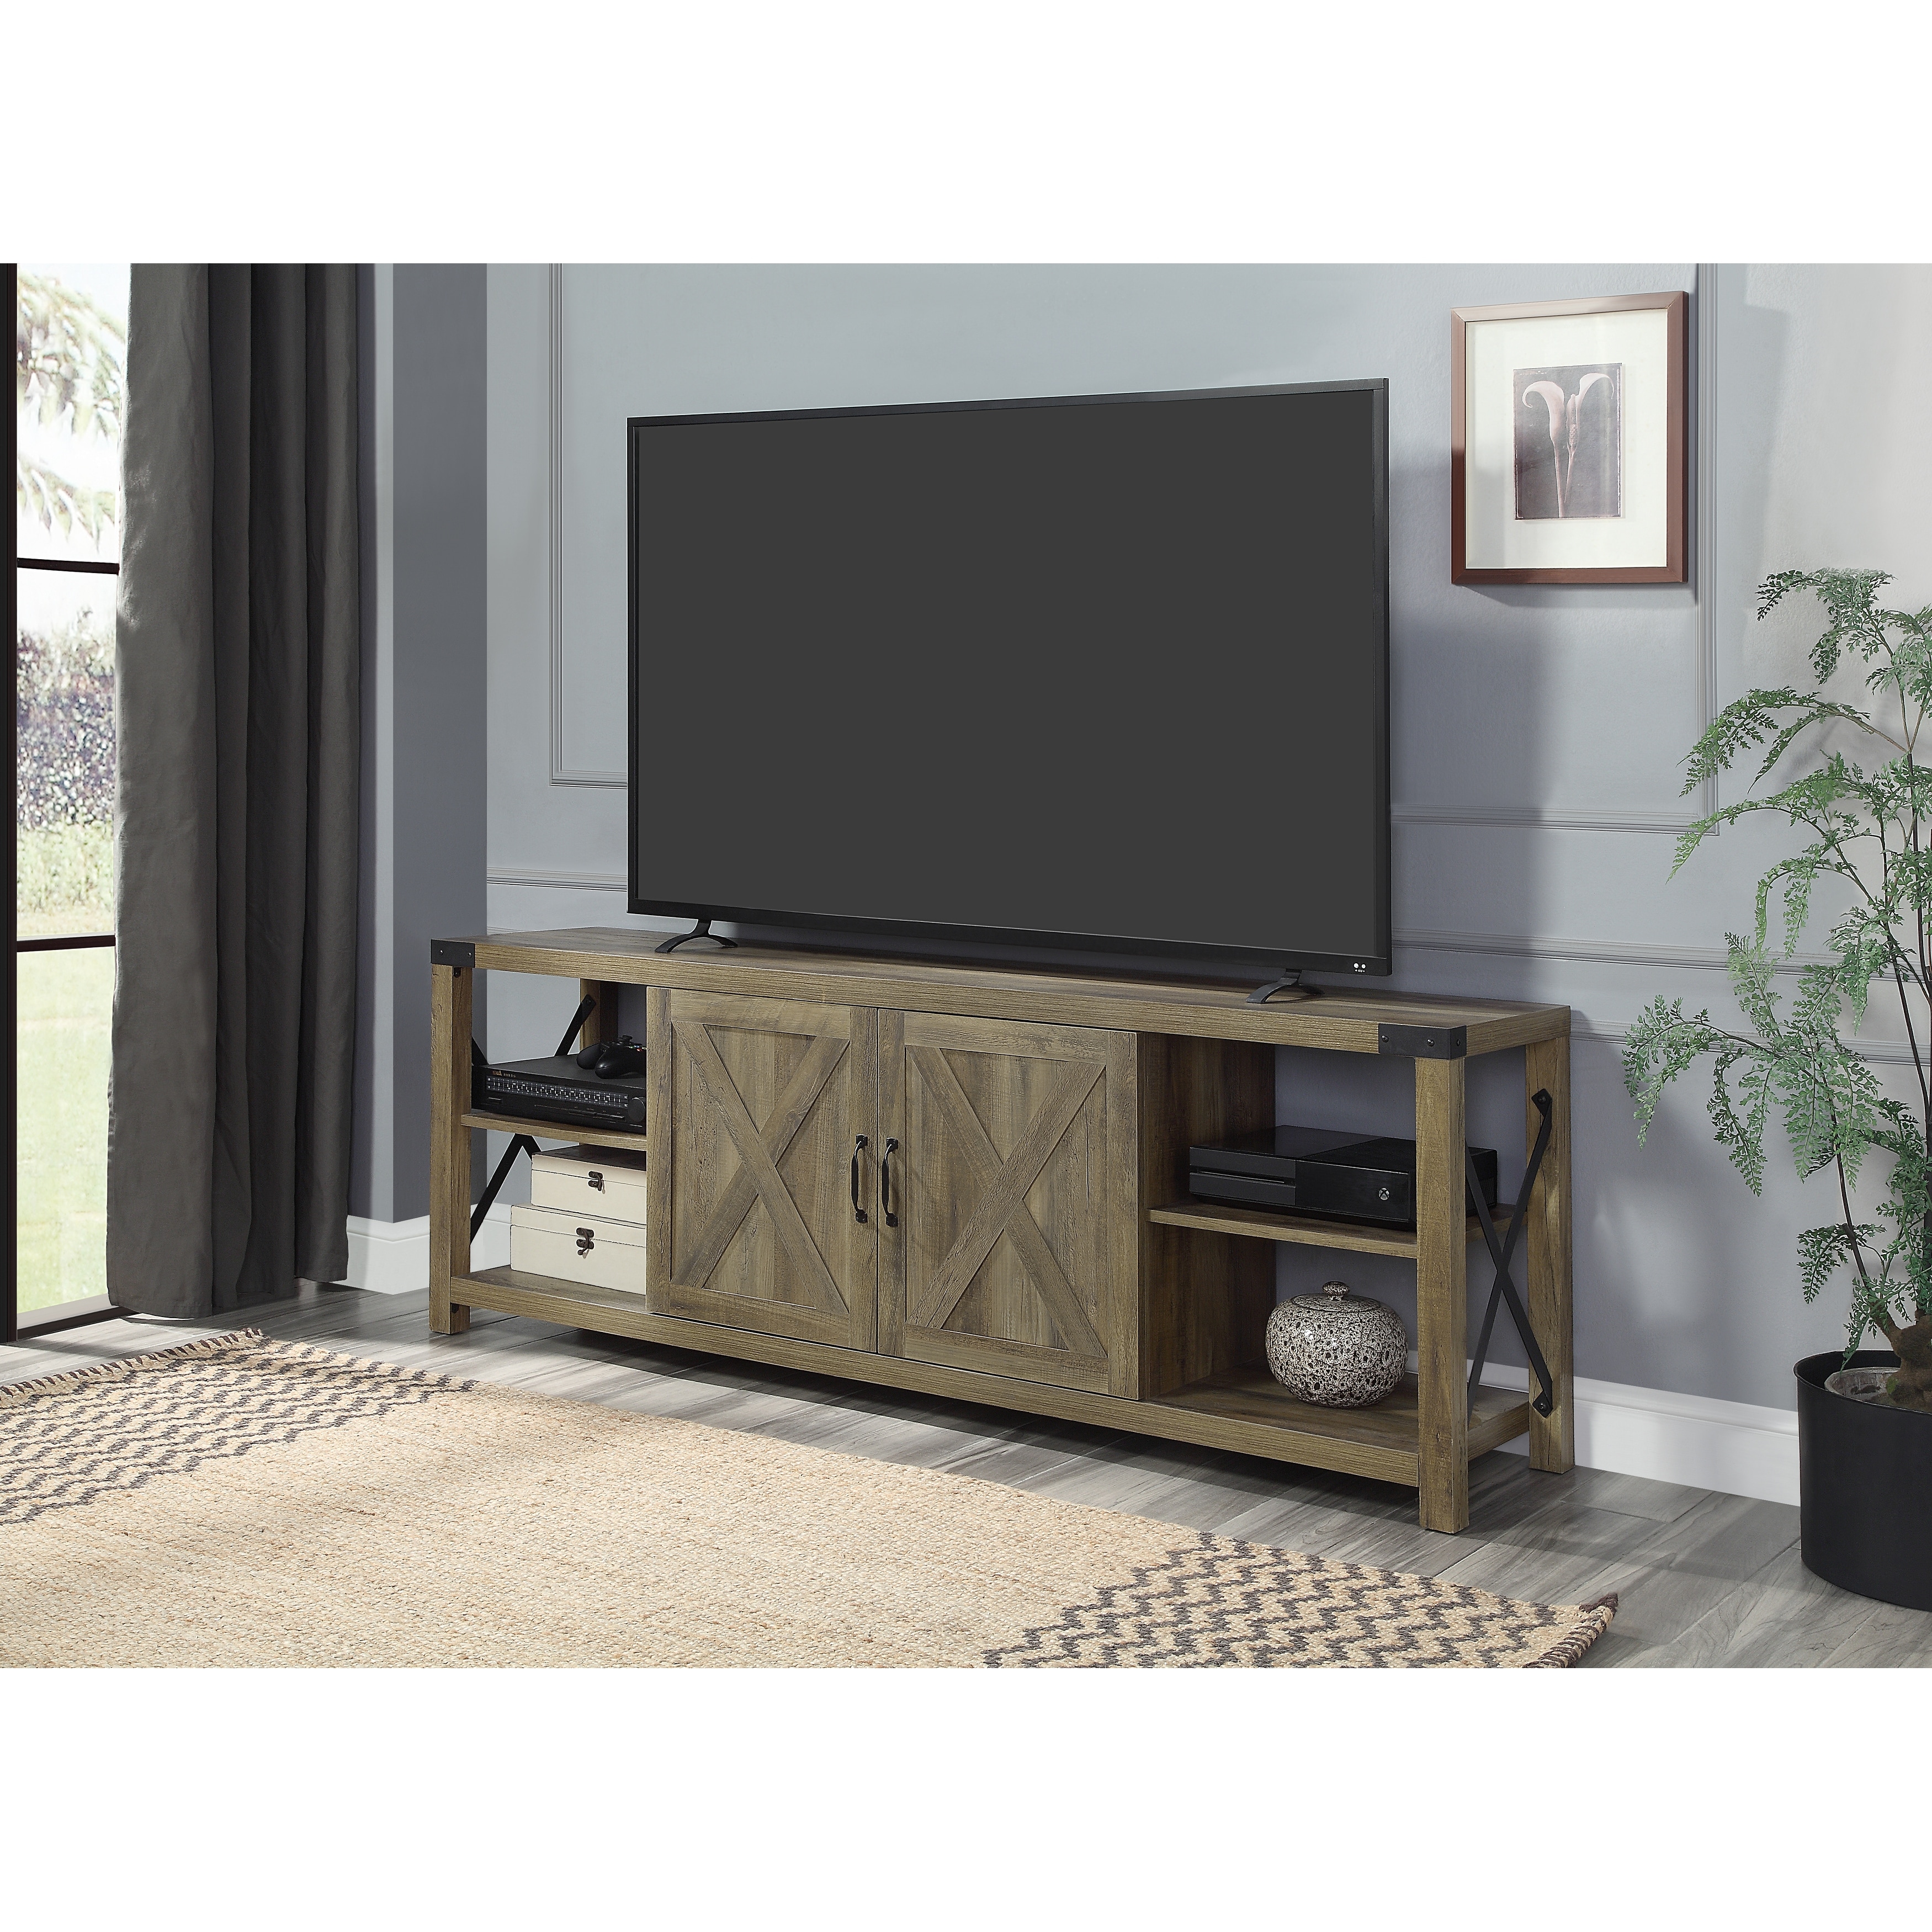 Industrial Style 71 Tv Stand With 4 Open Compartment and 2 Door Storage(w/2 Shelves)  Media Console  Solid Wood Tv Cabinet